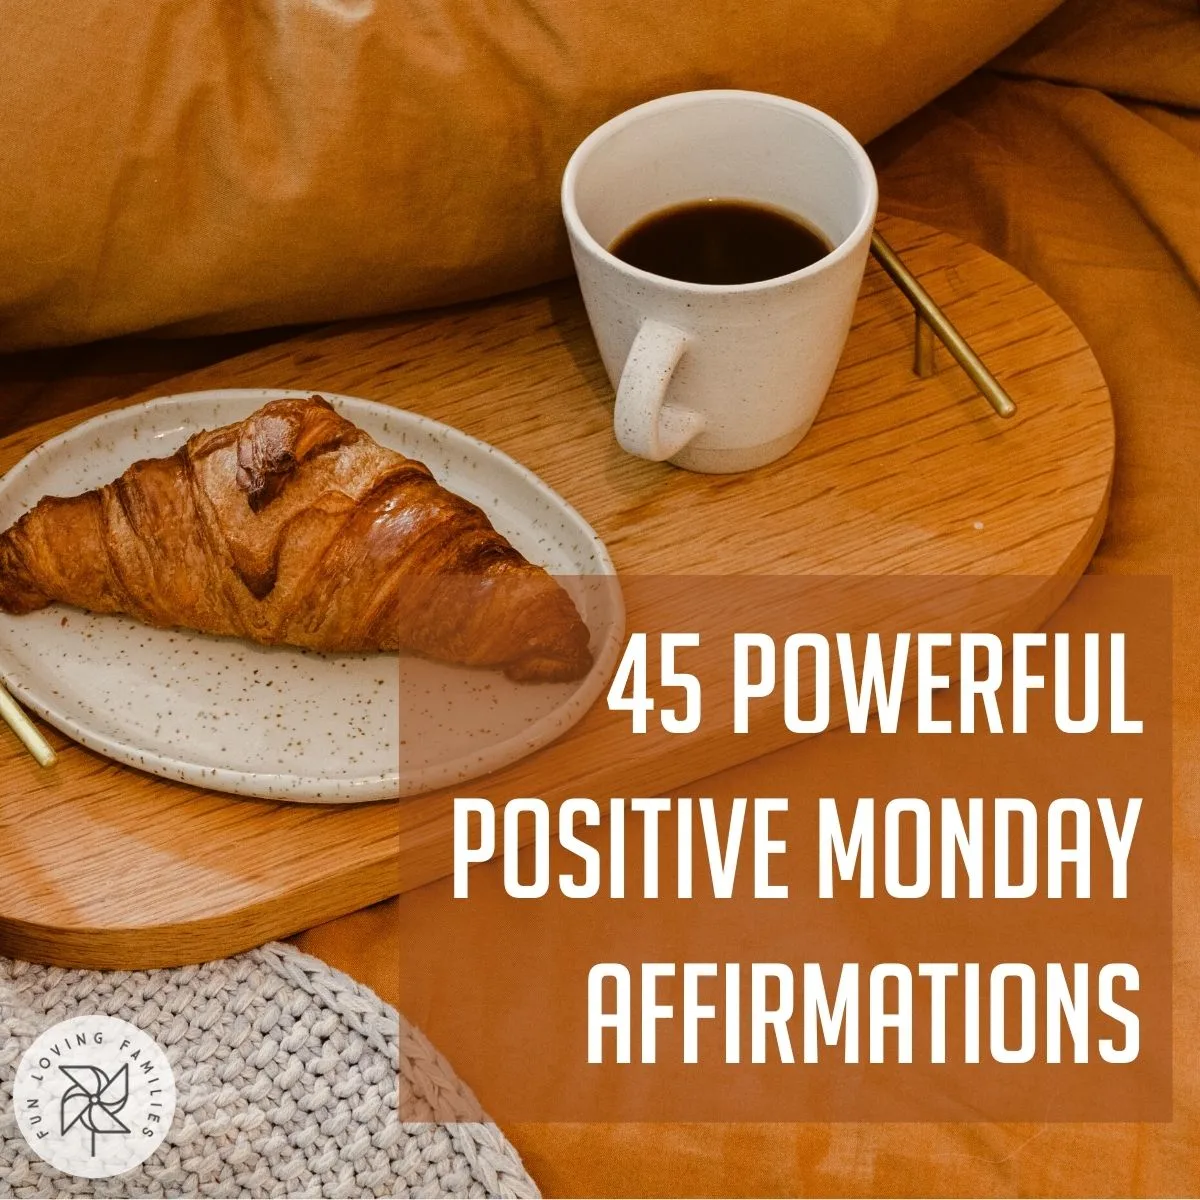 45 Powerful Positive Monday Affirmations